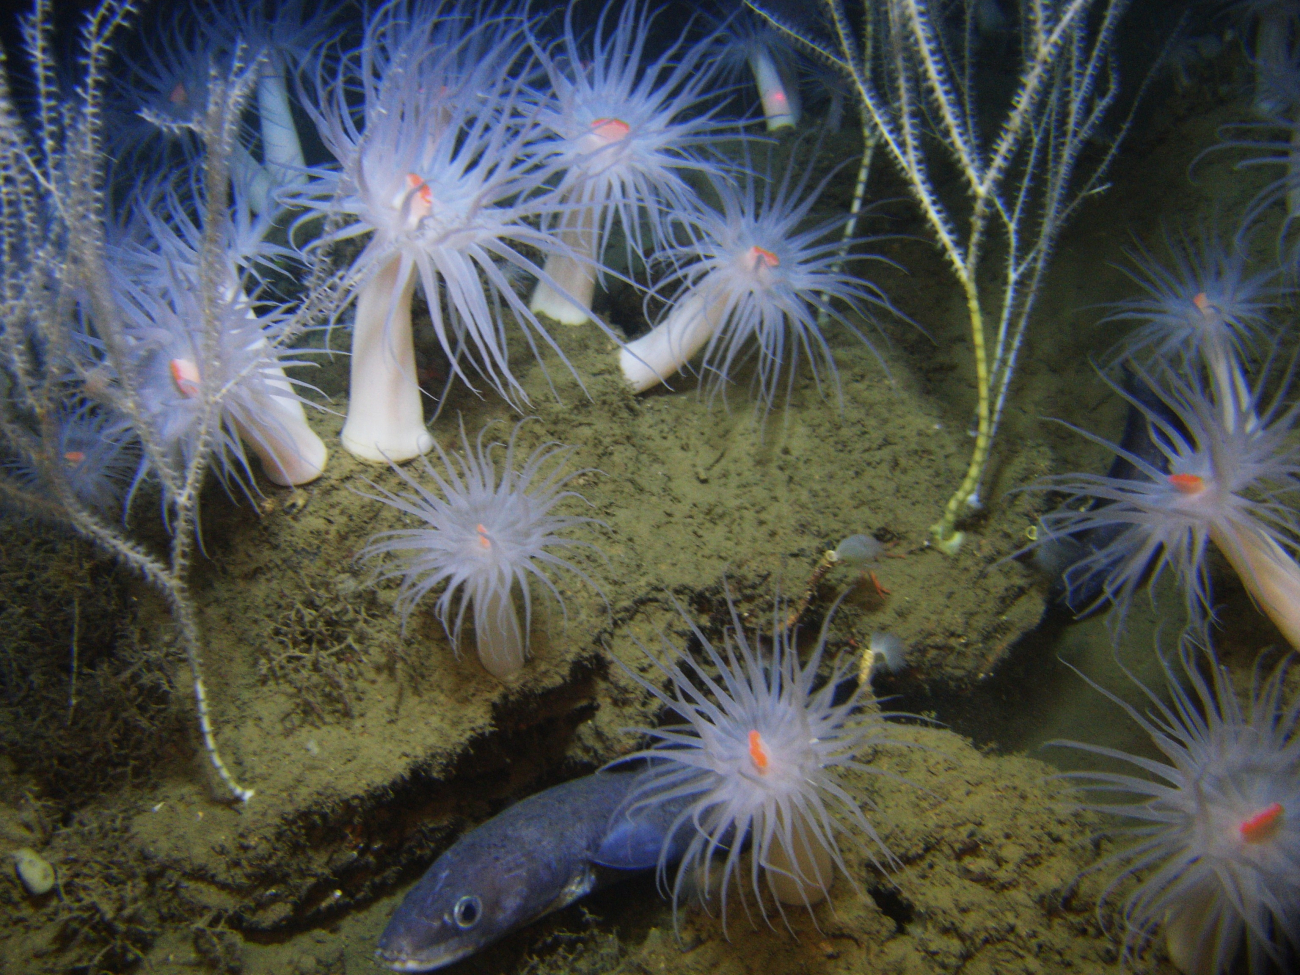 A cusk eel, small bamboo corals, and large white anemones with orange mouths